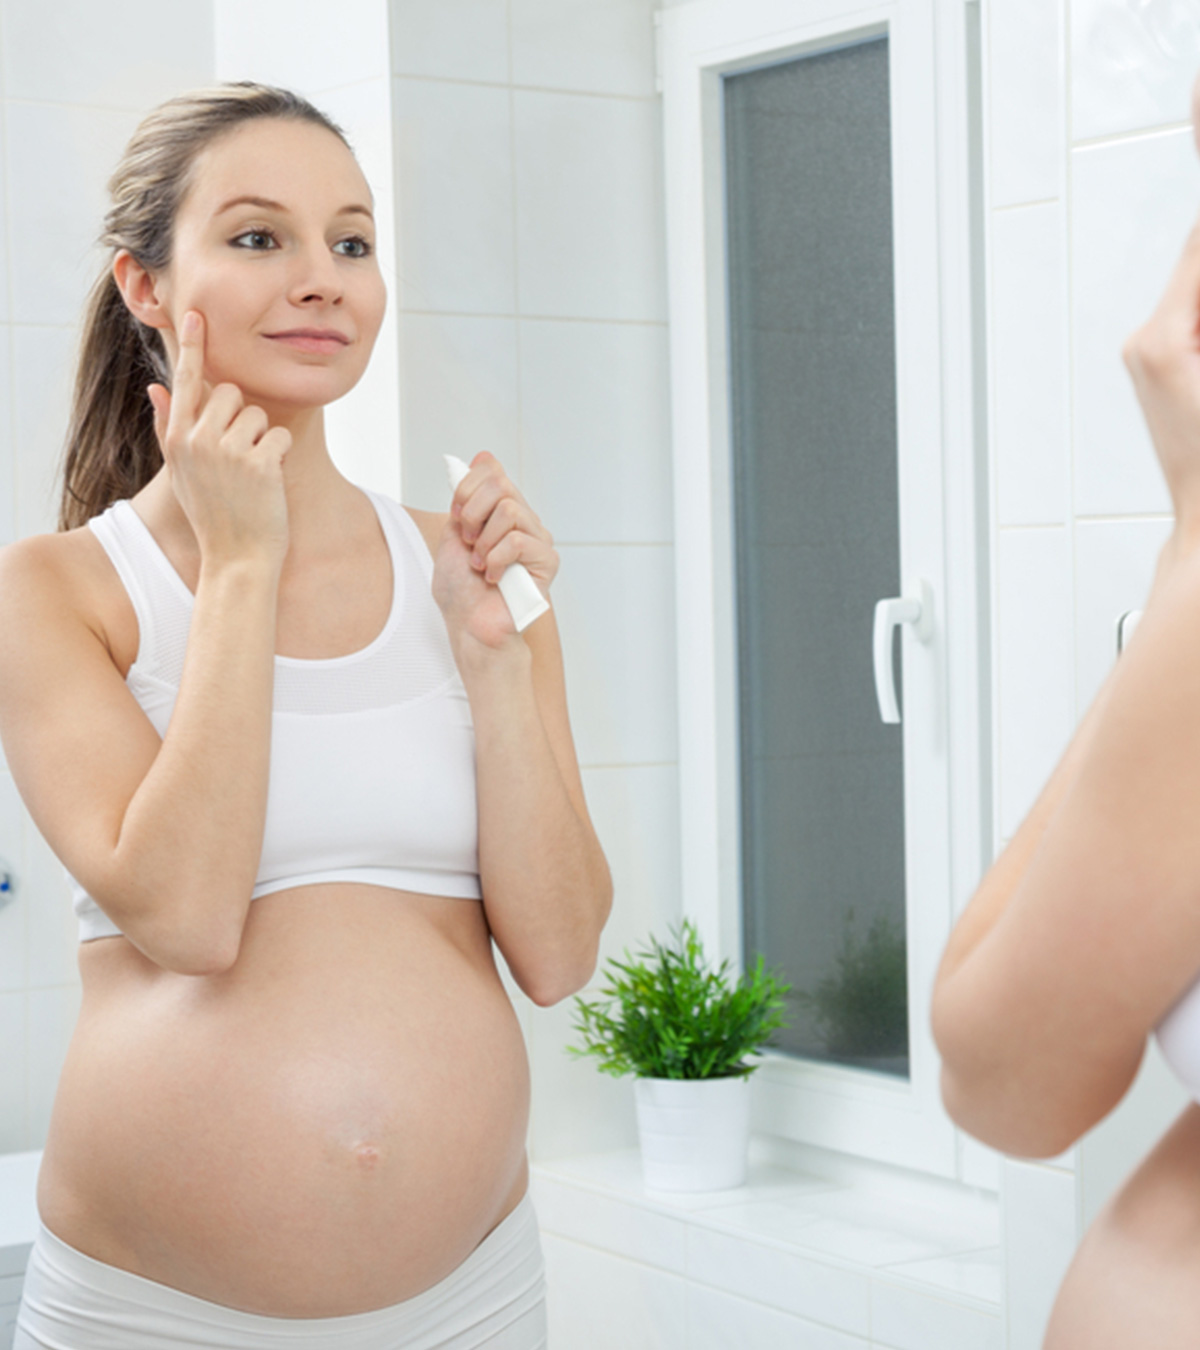 Avoid These Skincare Ingredients For A Pregnancy-Safe Skin Care Routine